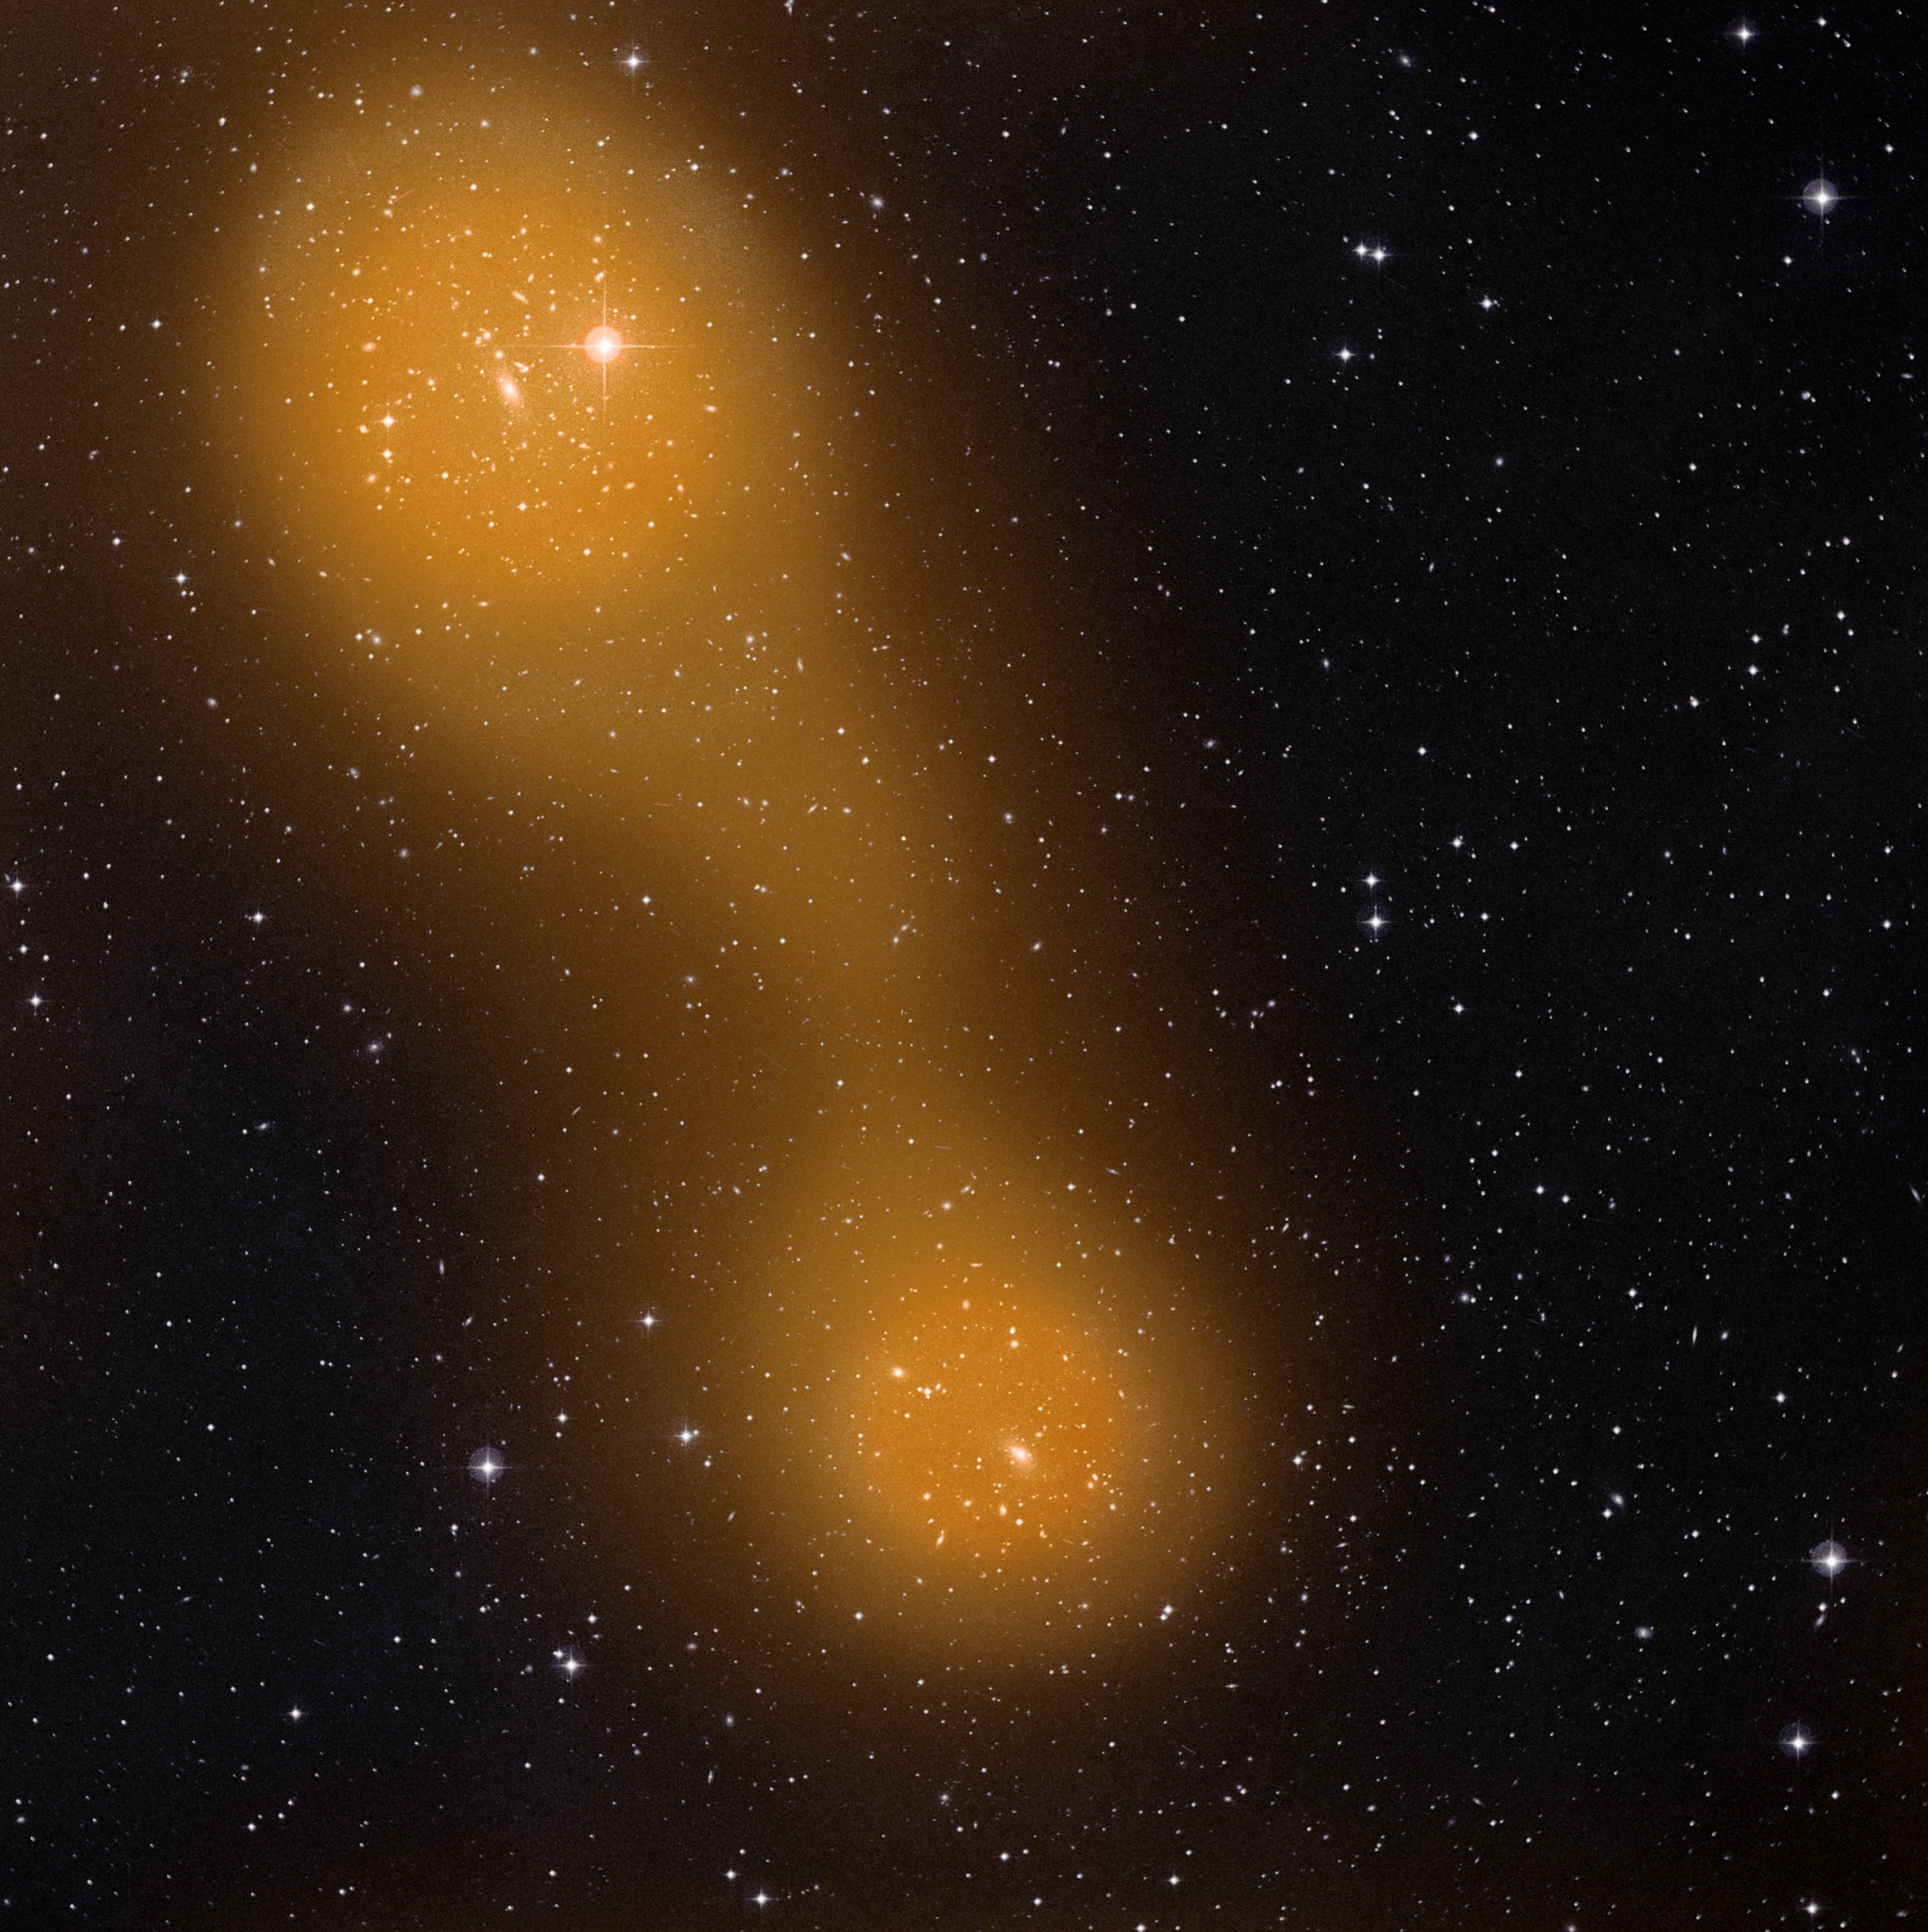 Galaxy Clusters Connected By A Gas Bridge